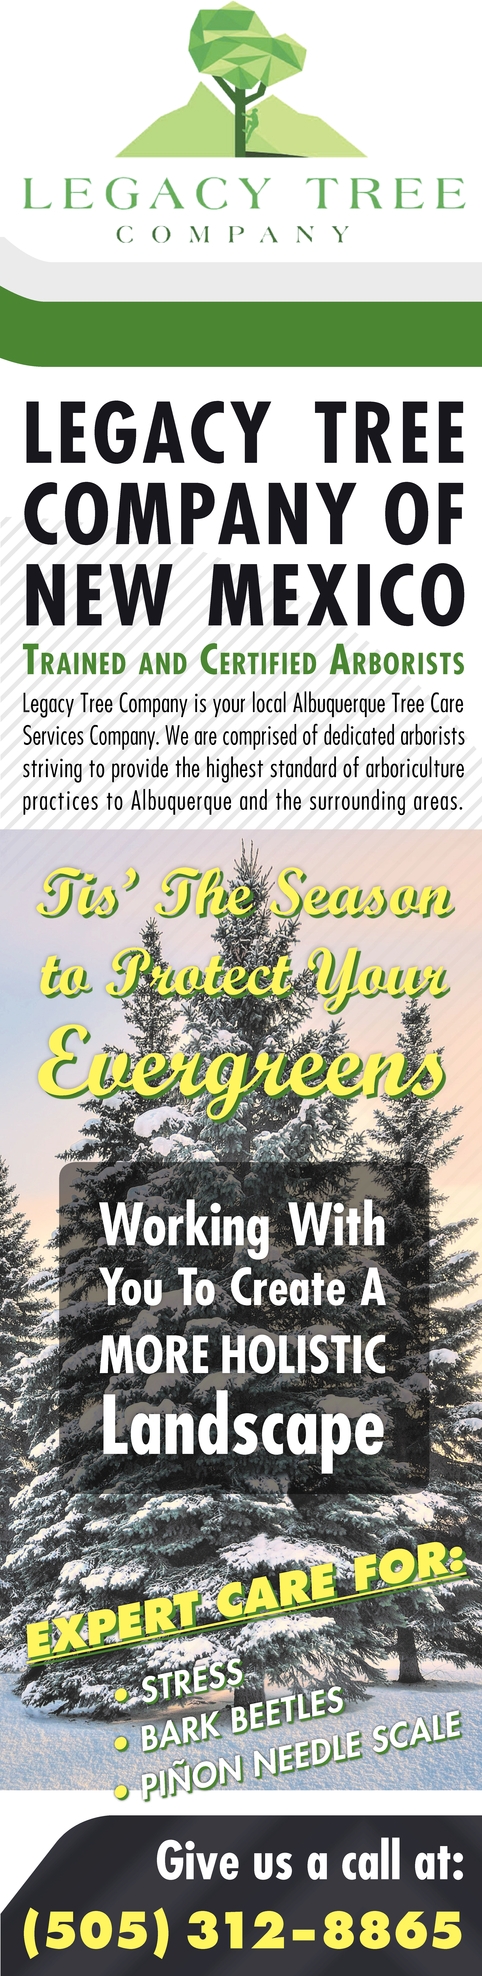 Tis' The Season To Protect Your Evergreens